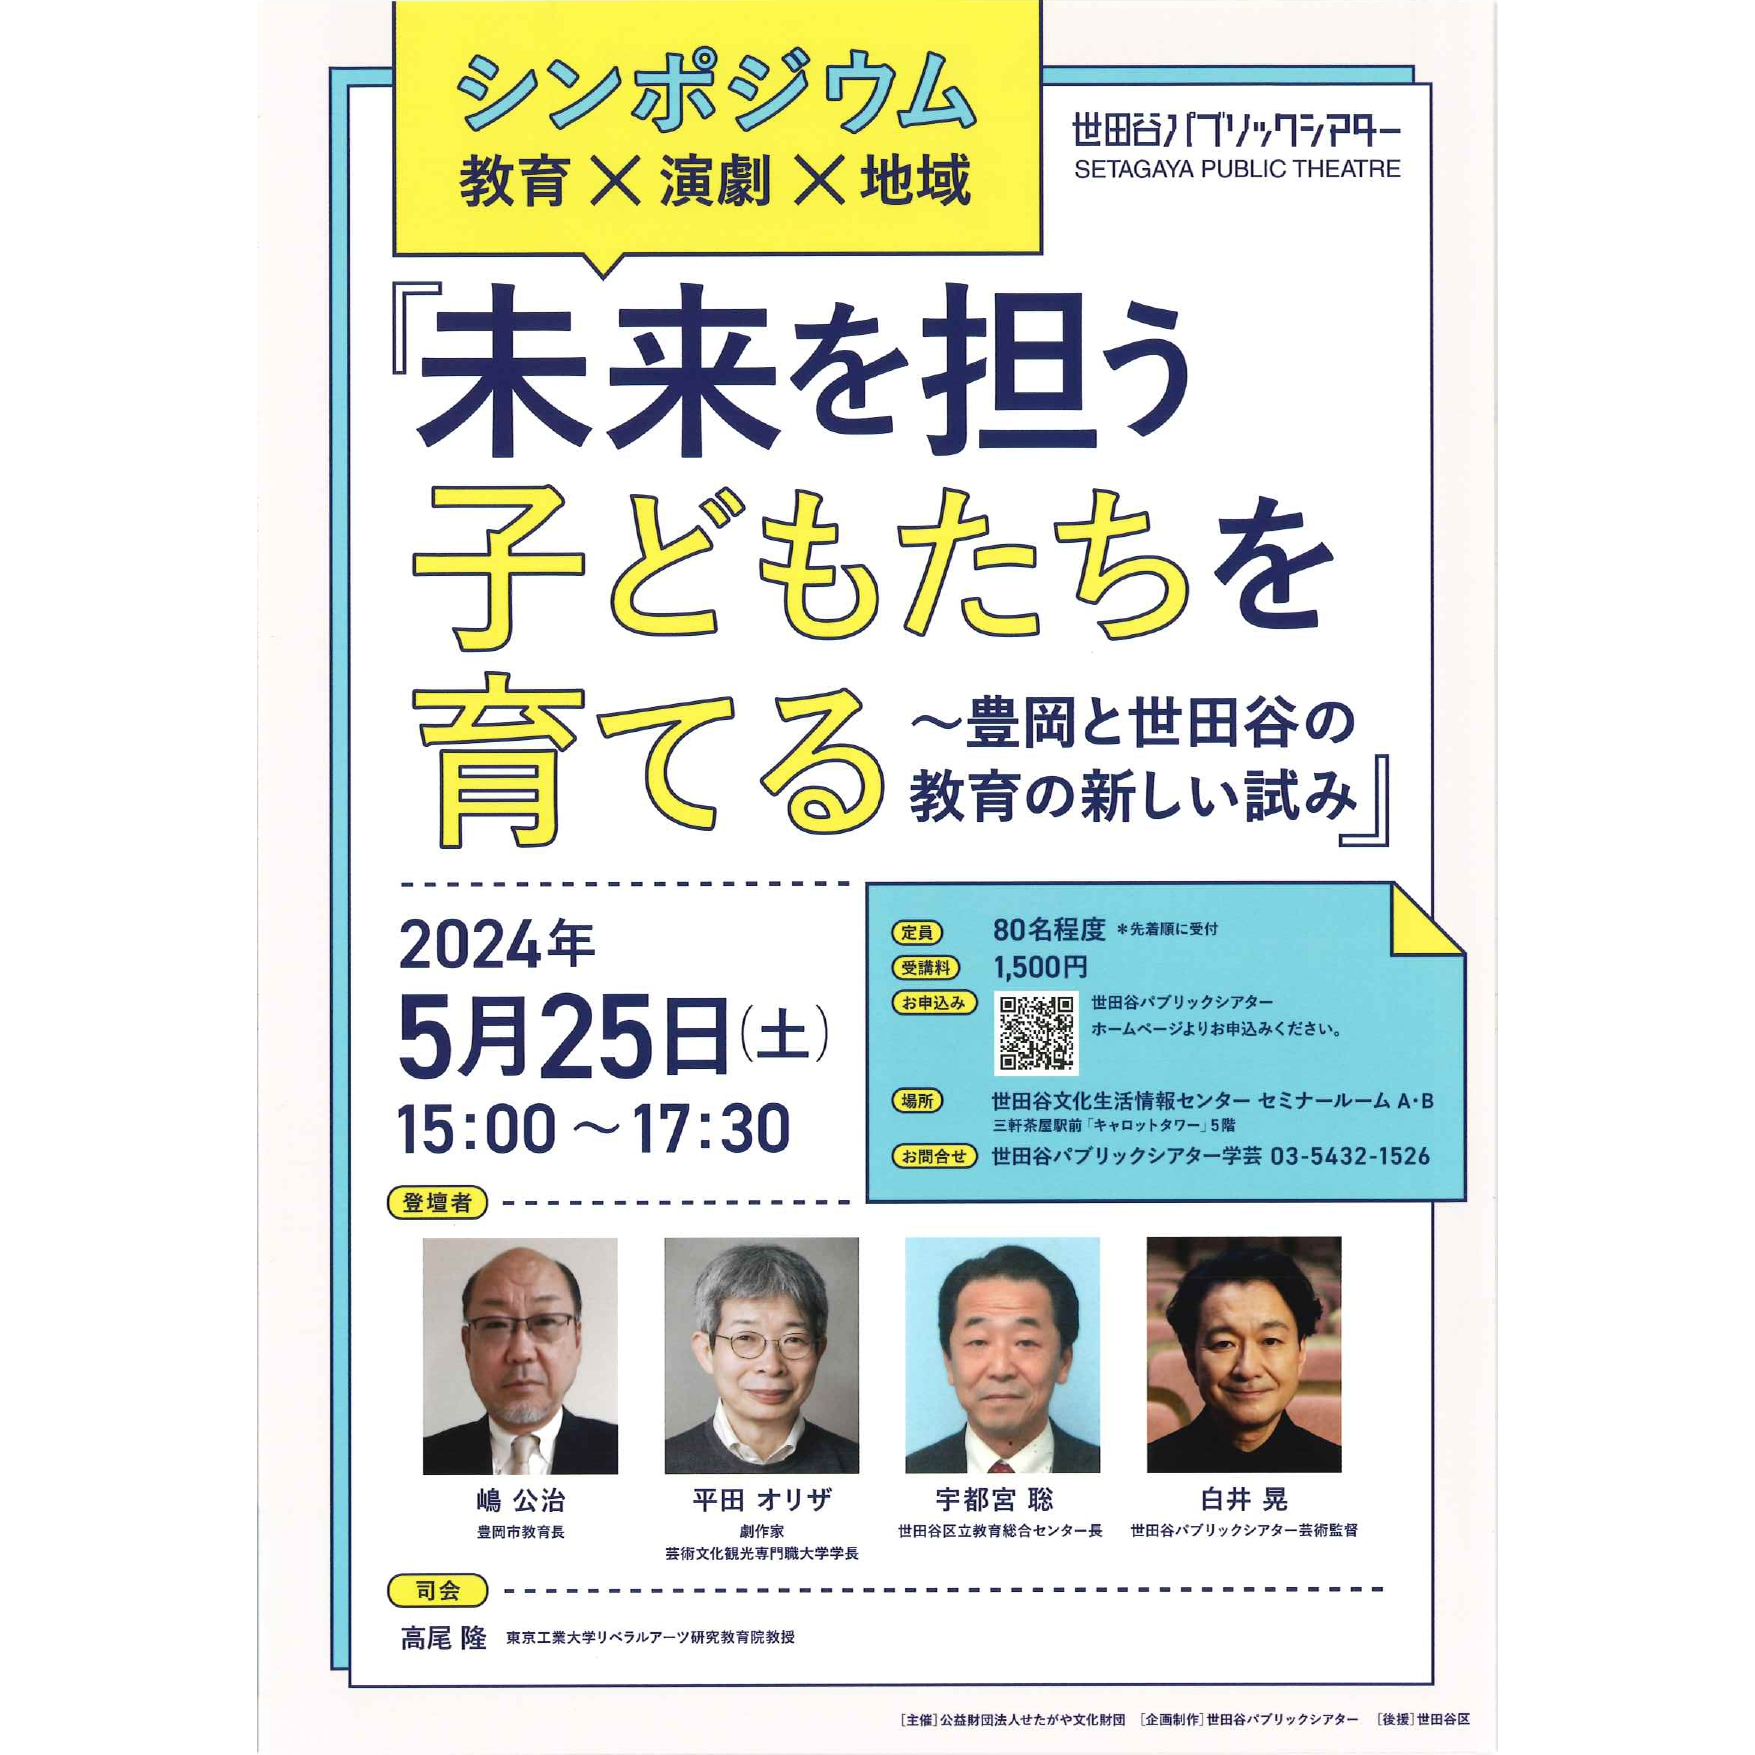 “Nursing children who will carry the future – A new approach to education in Toyooka and Setagaya”